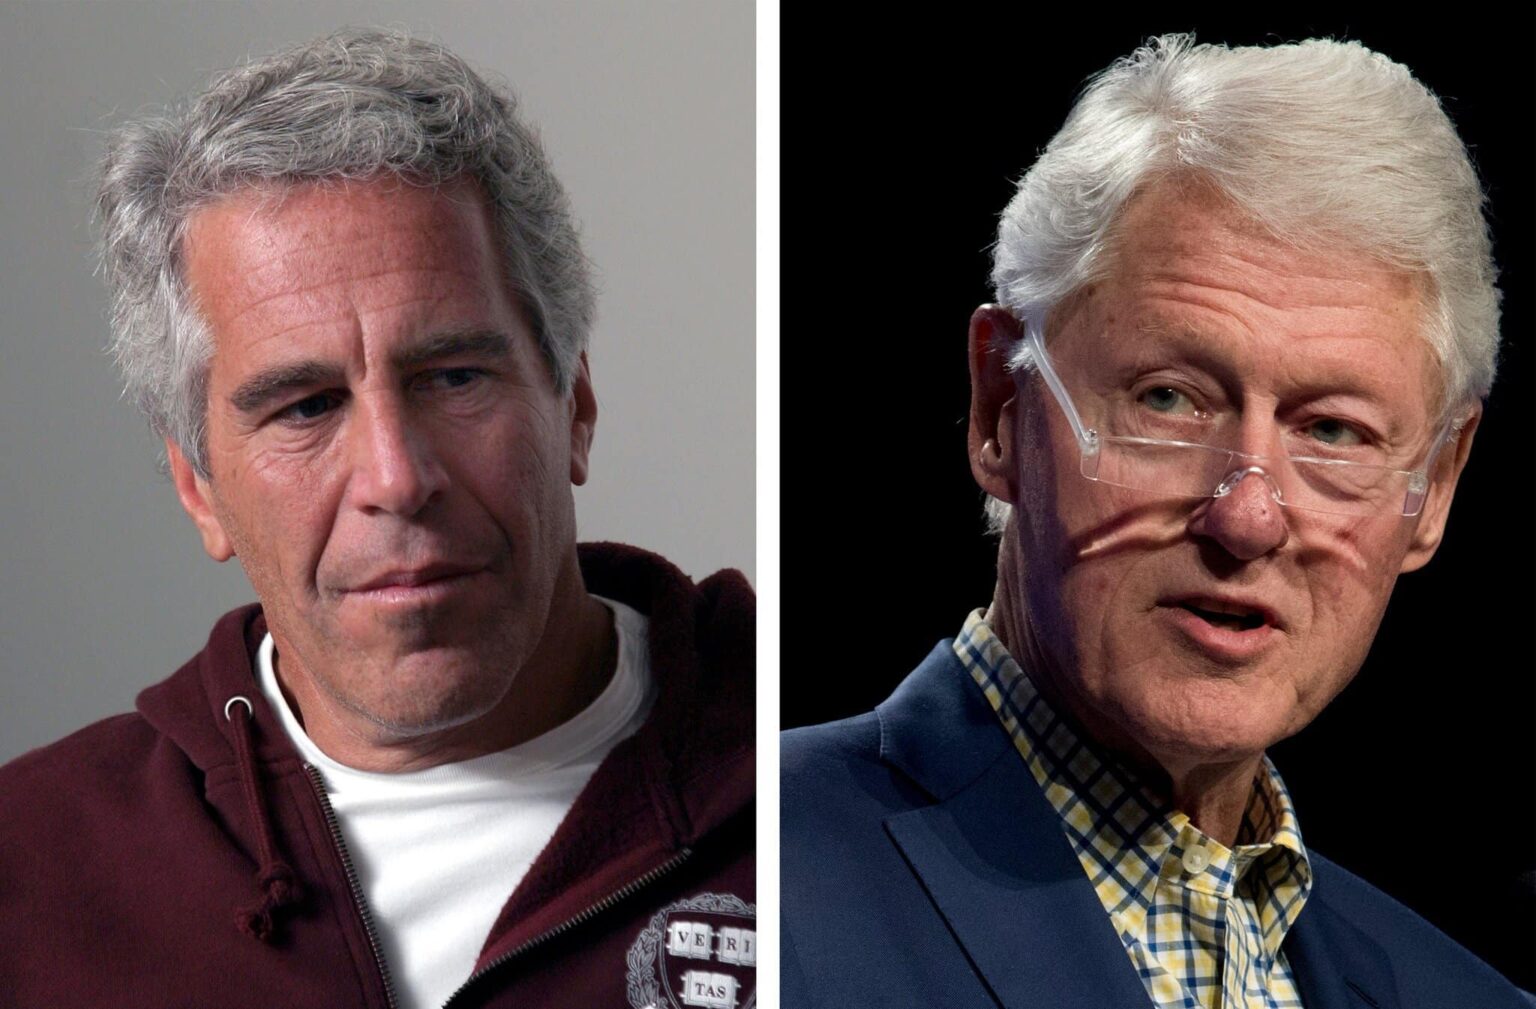 Jeffrey Epstein made his way into several social circles, including that of former U.S. president Bill Clinton. But what exactly was their connection?